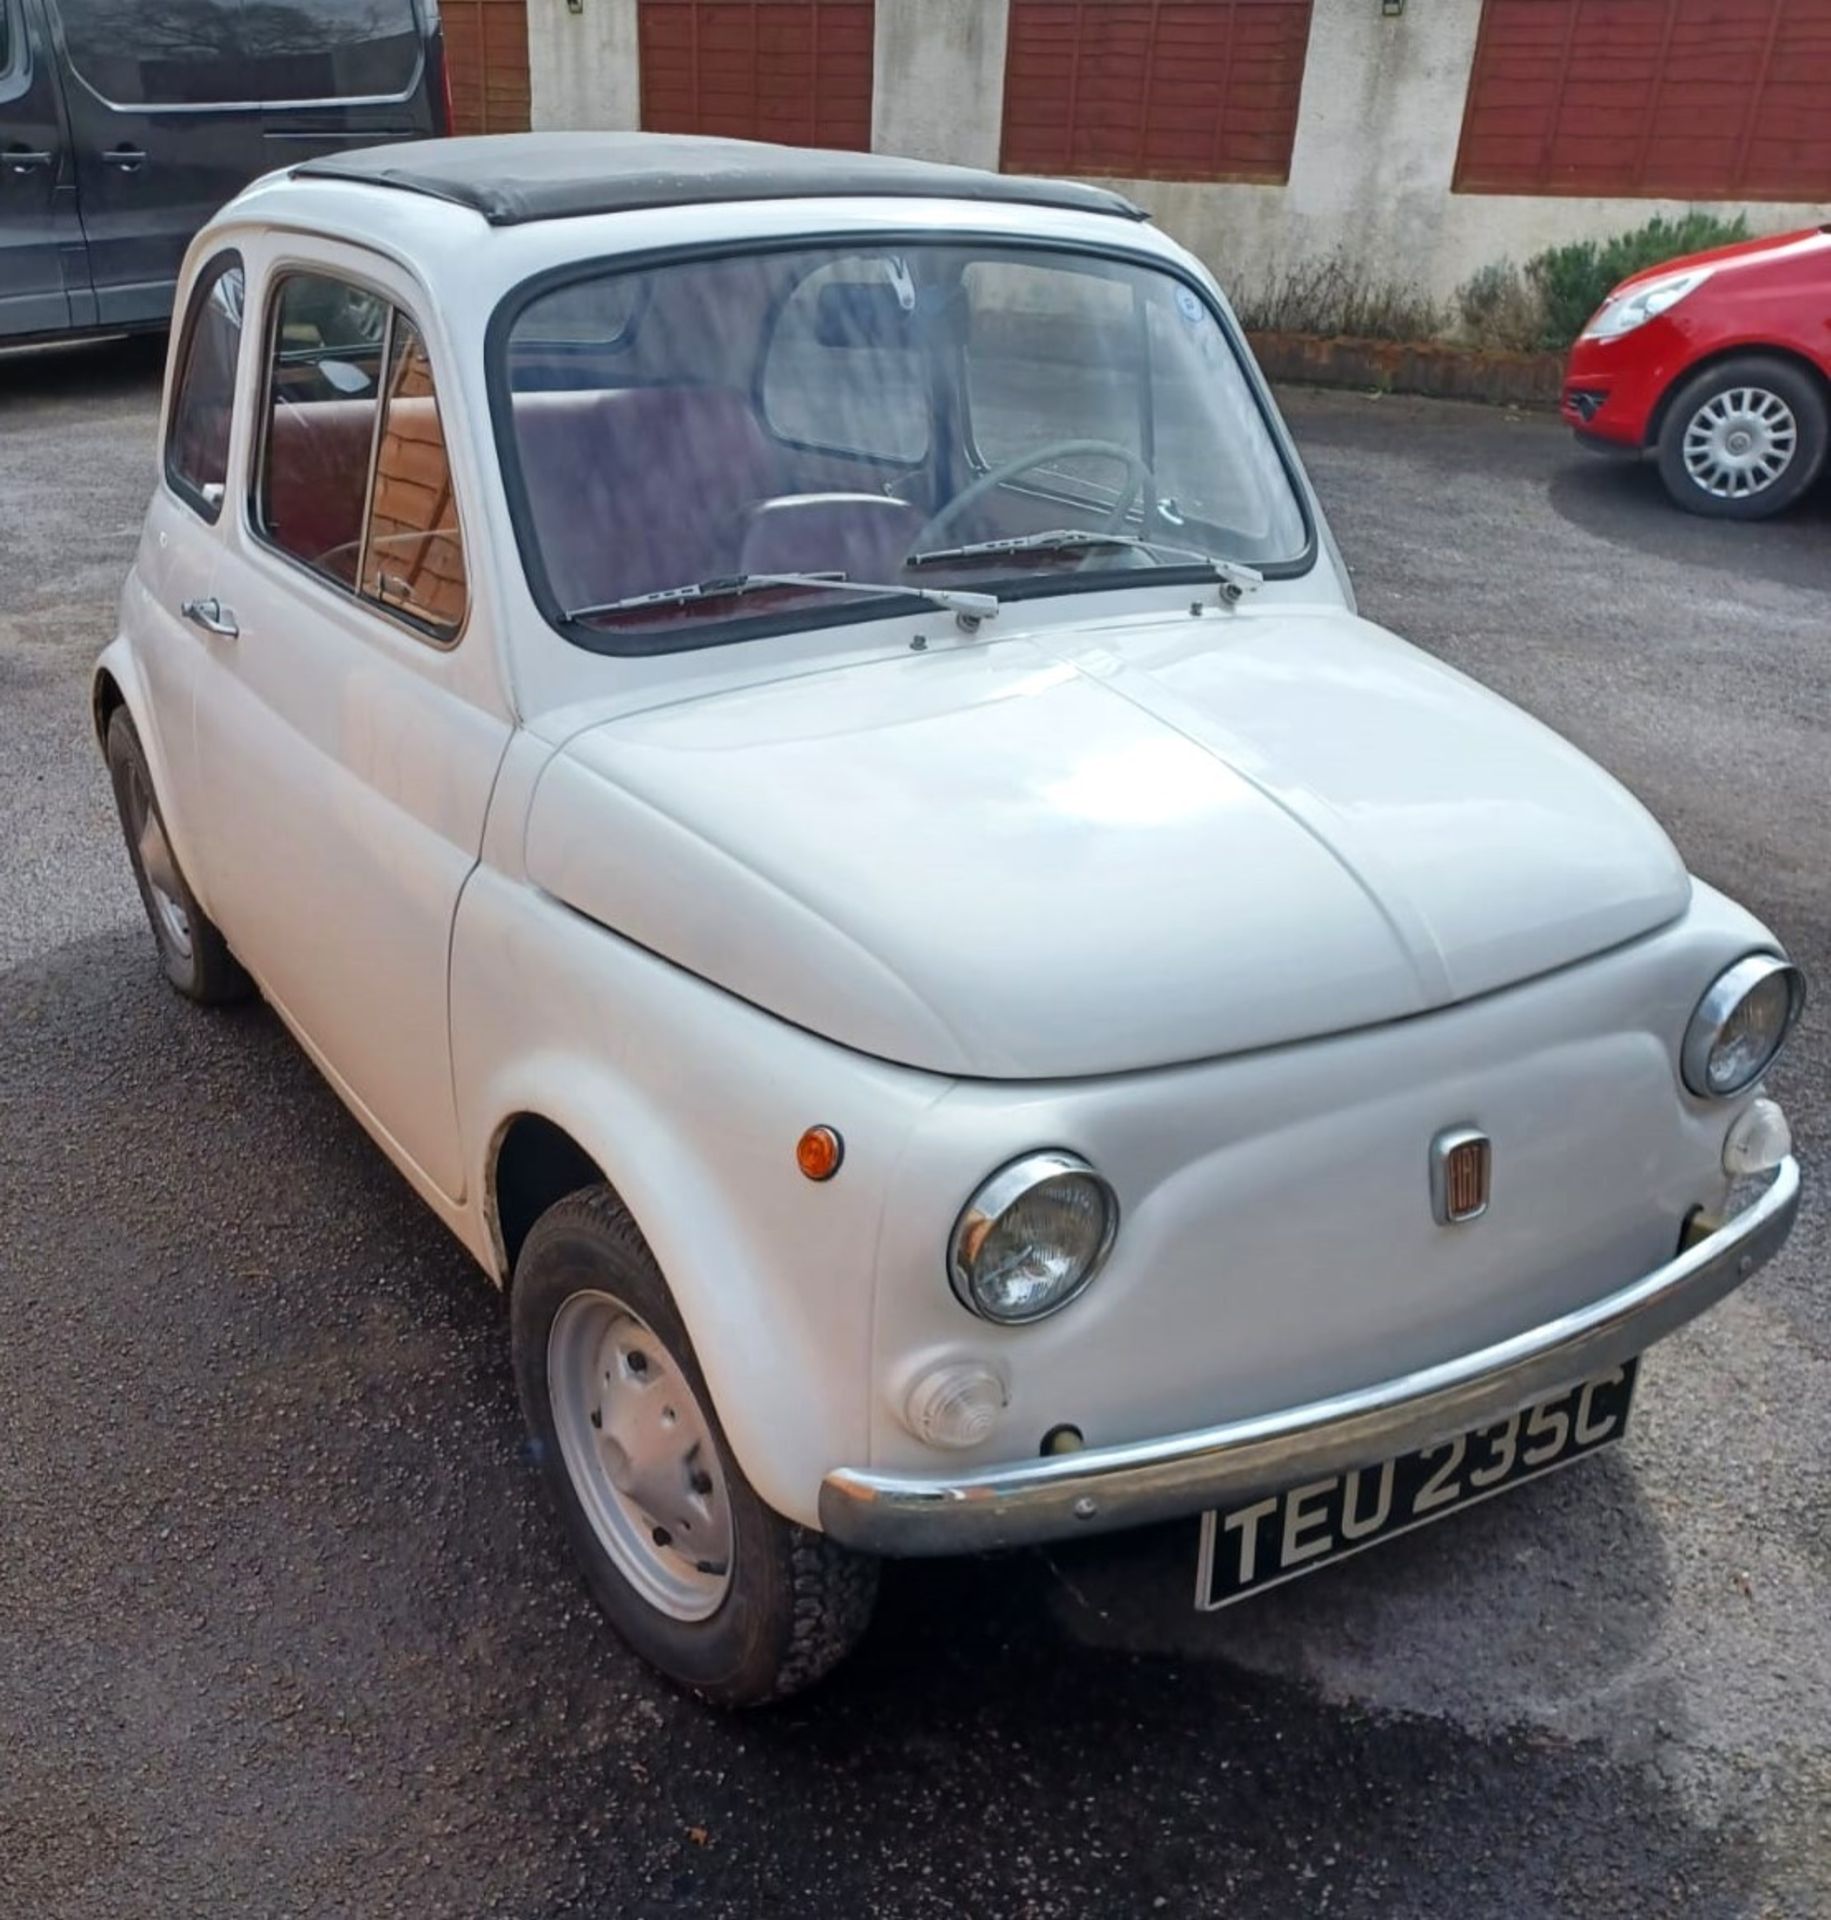 1965 FIAT 500F SALOON Registration Number: TEU 235C Chassis Number: 110F0954214 Recorded Mileage: - Image 2 of 15